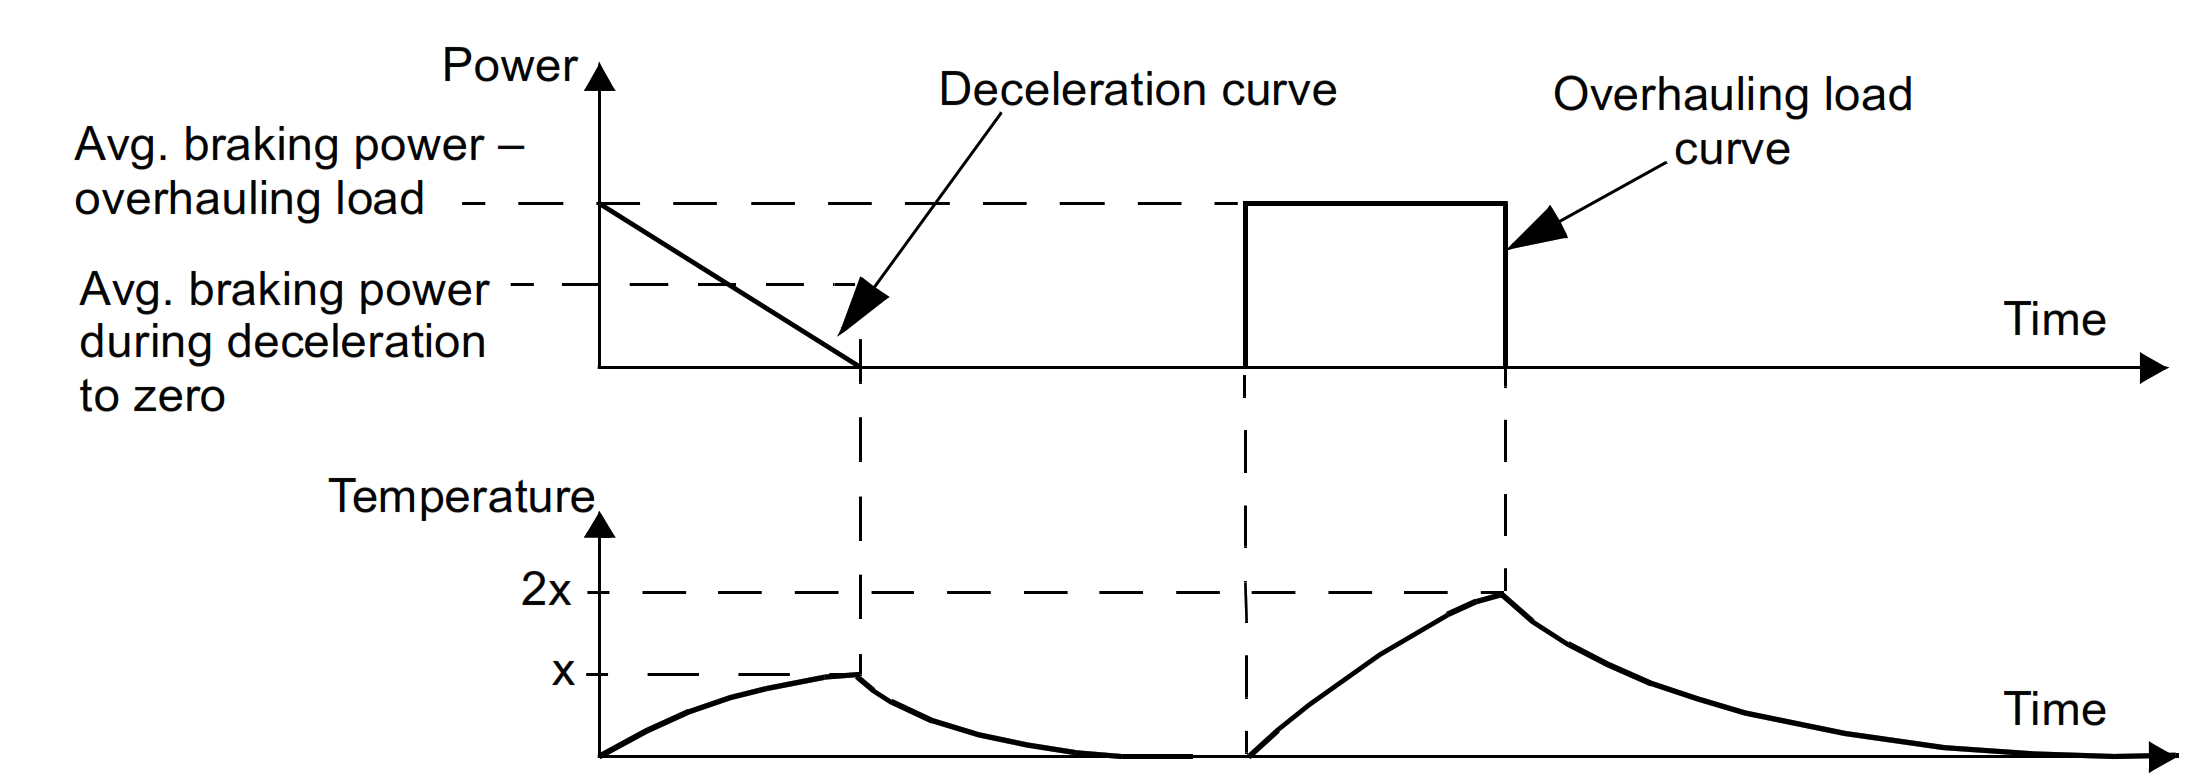 deceleration-and-overhauling-curves